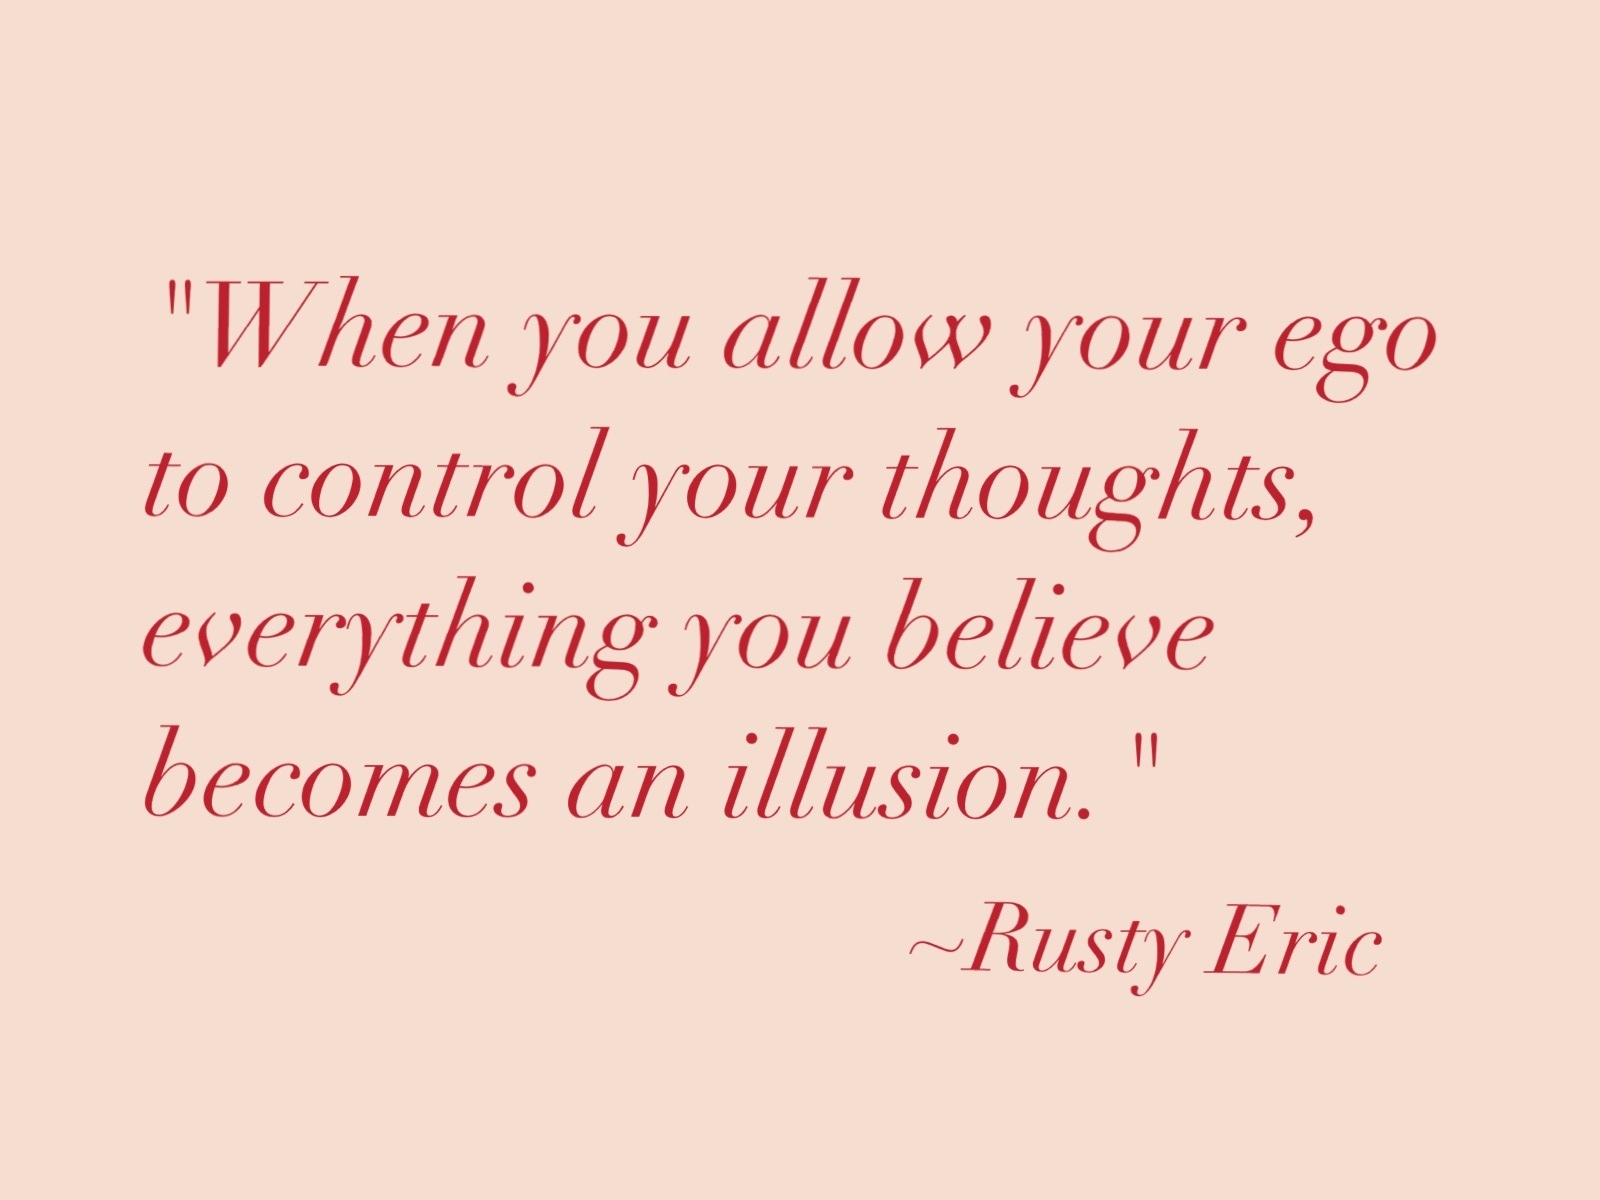 When you allow your ego to control your thoughts, everything you believe becomes an illusion.  Rusty Eric